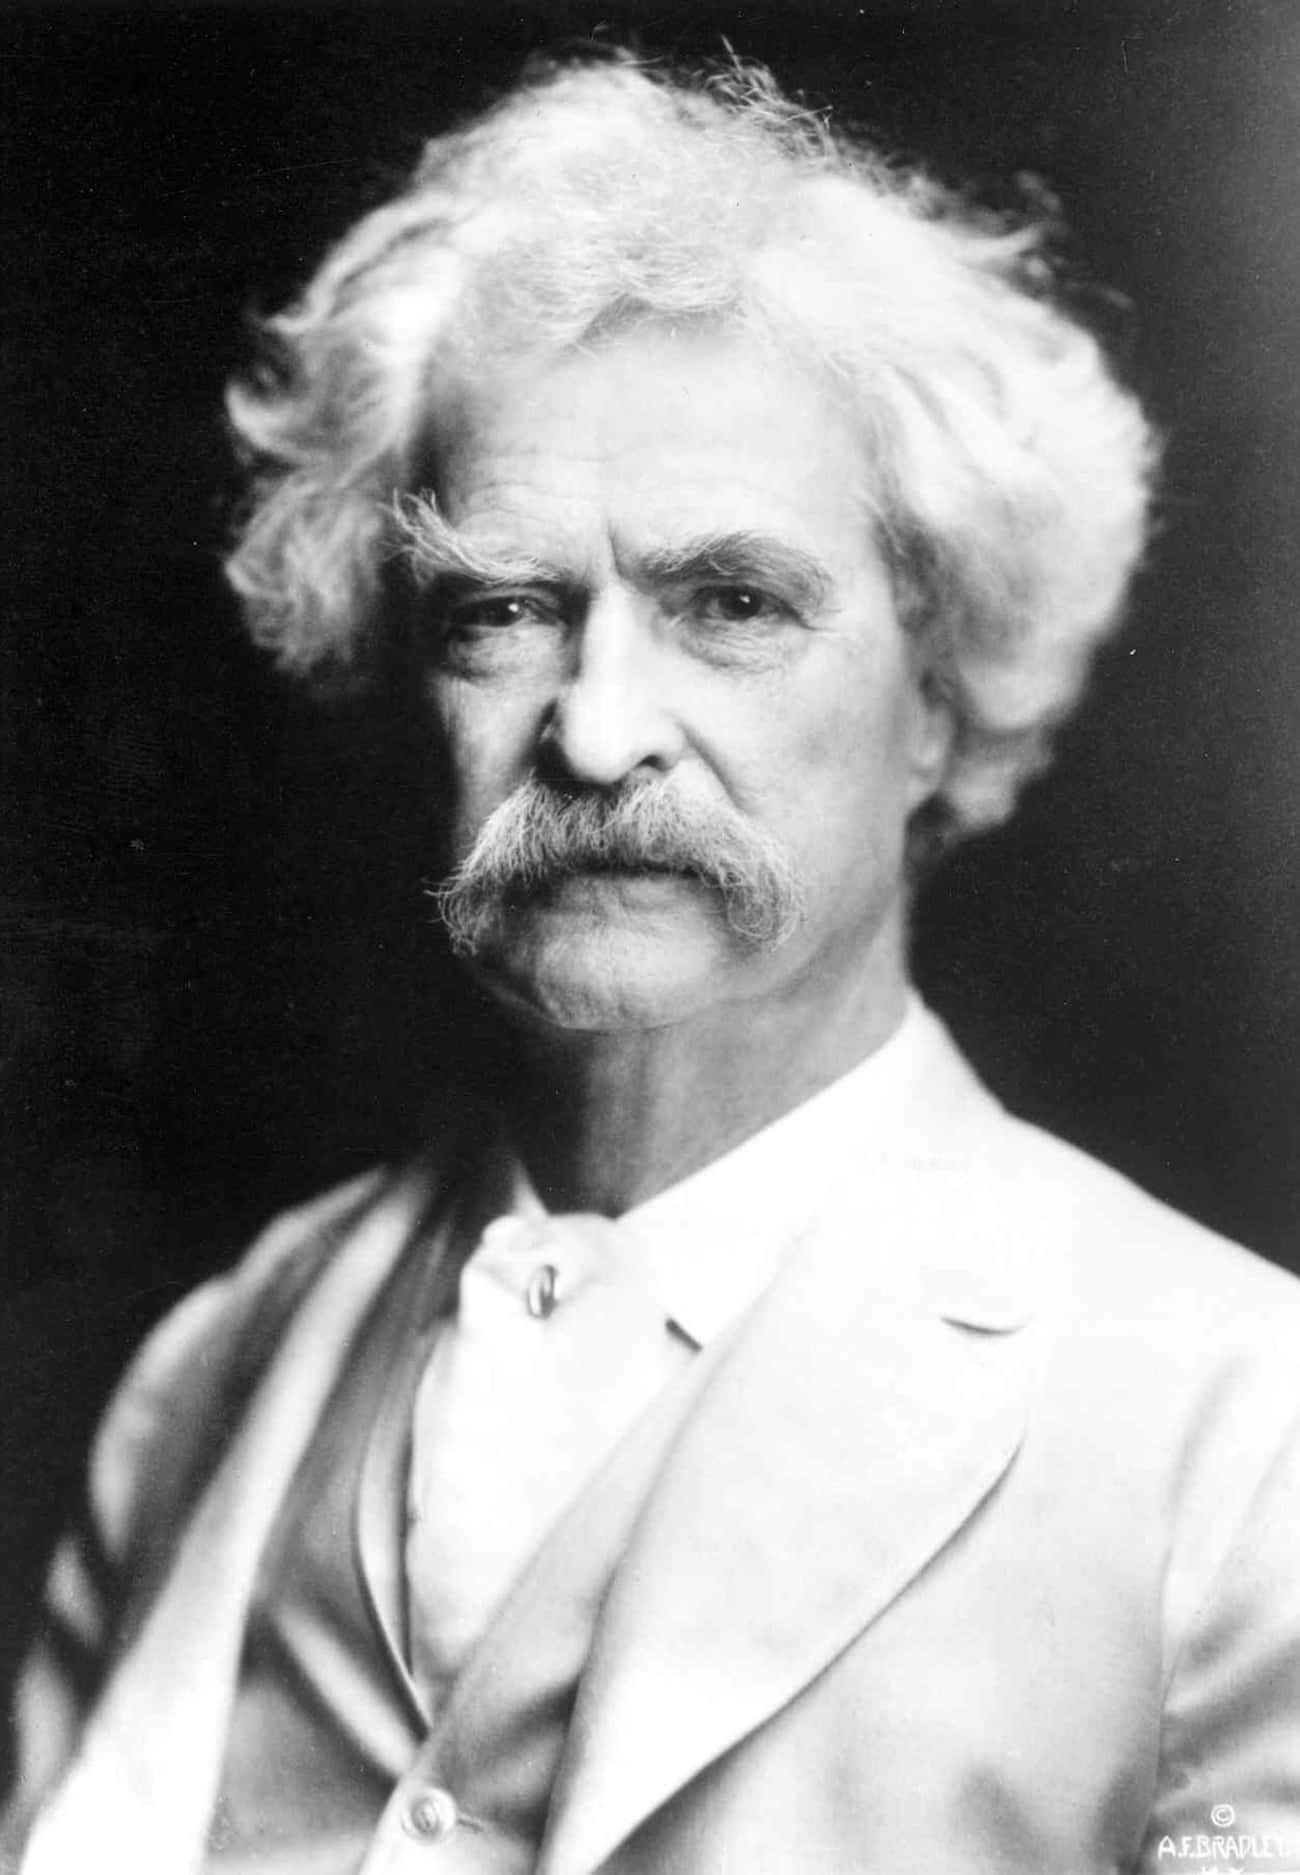 Mark Twain Based His Passing On A Comet